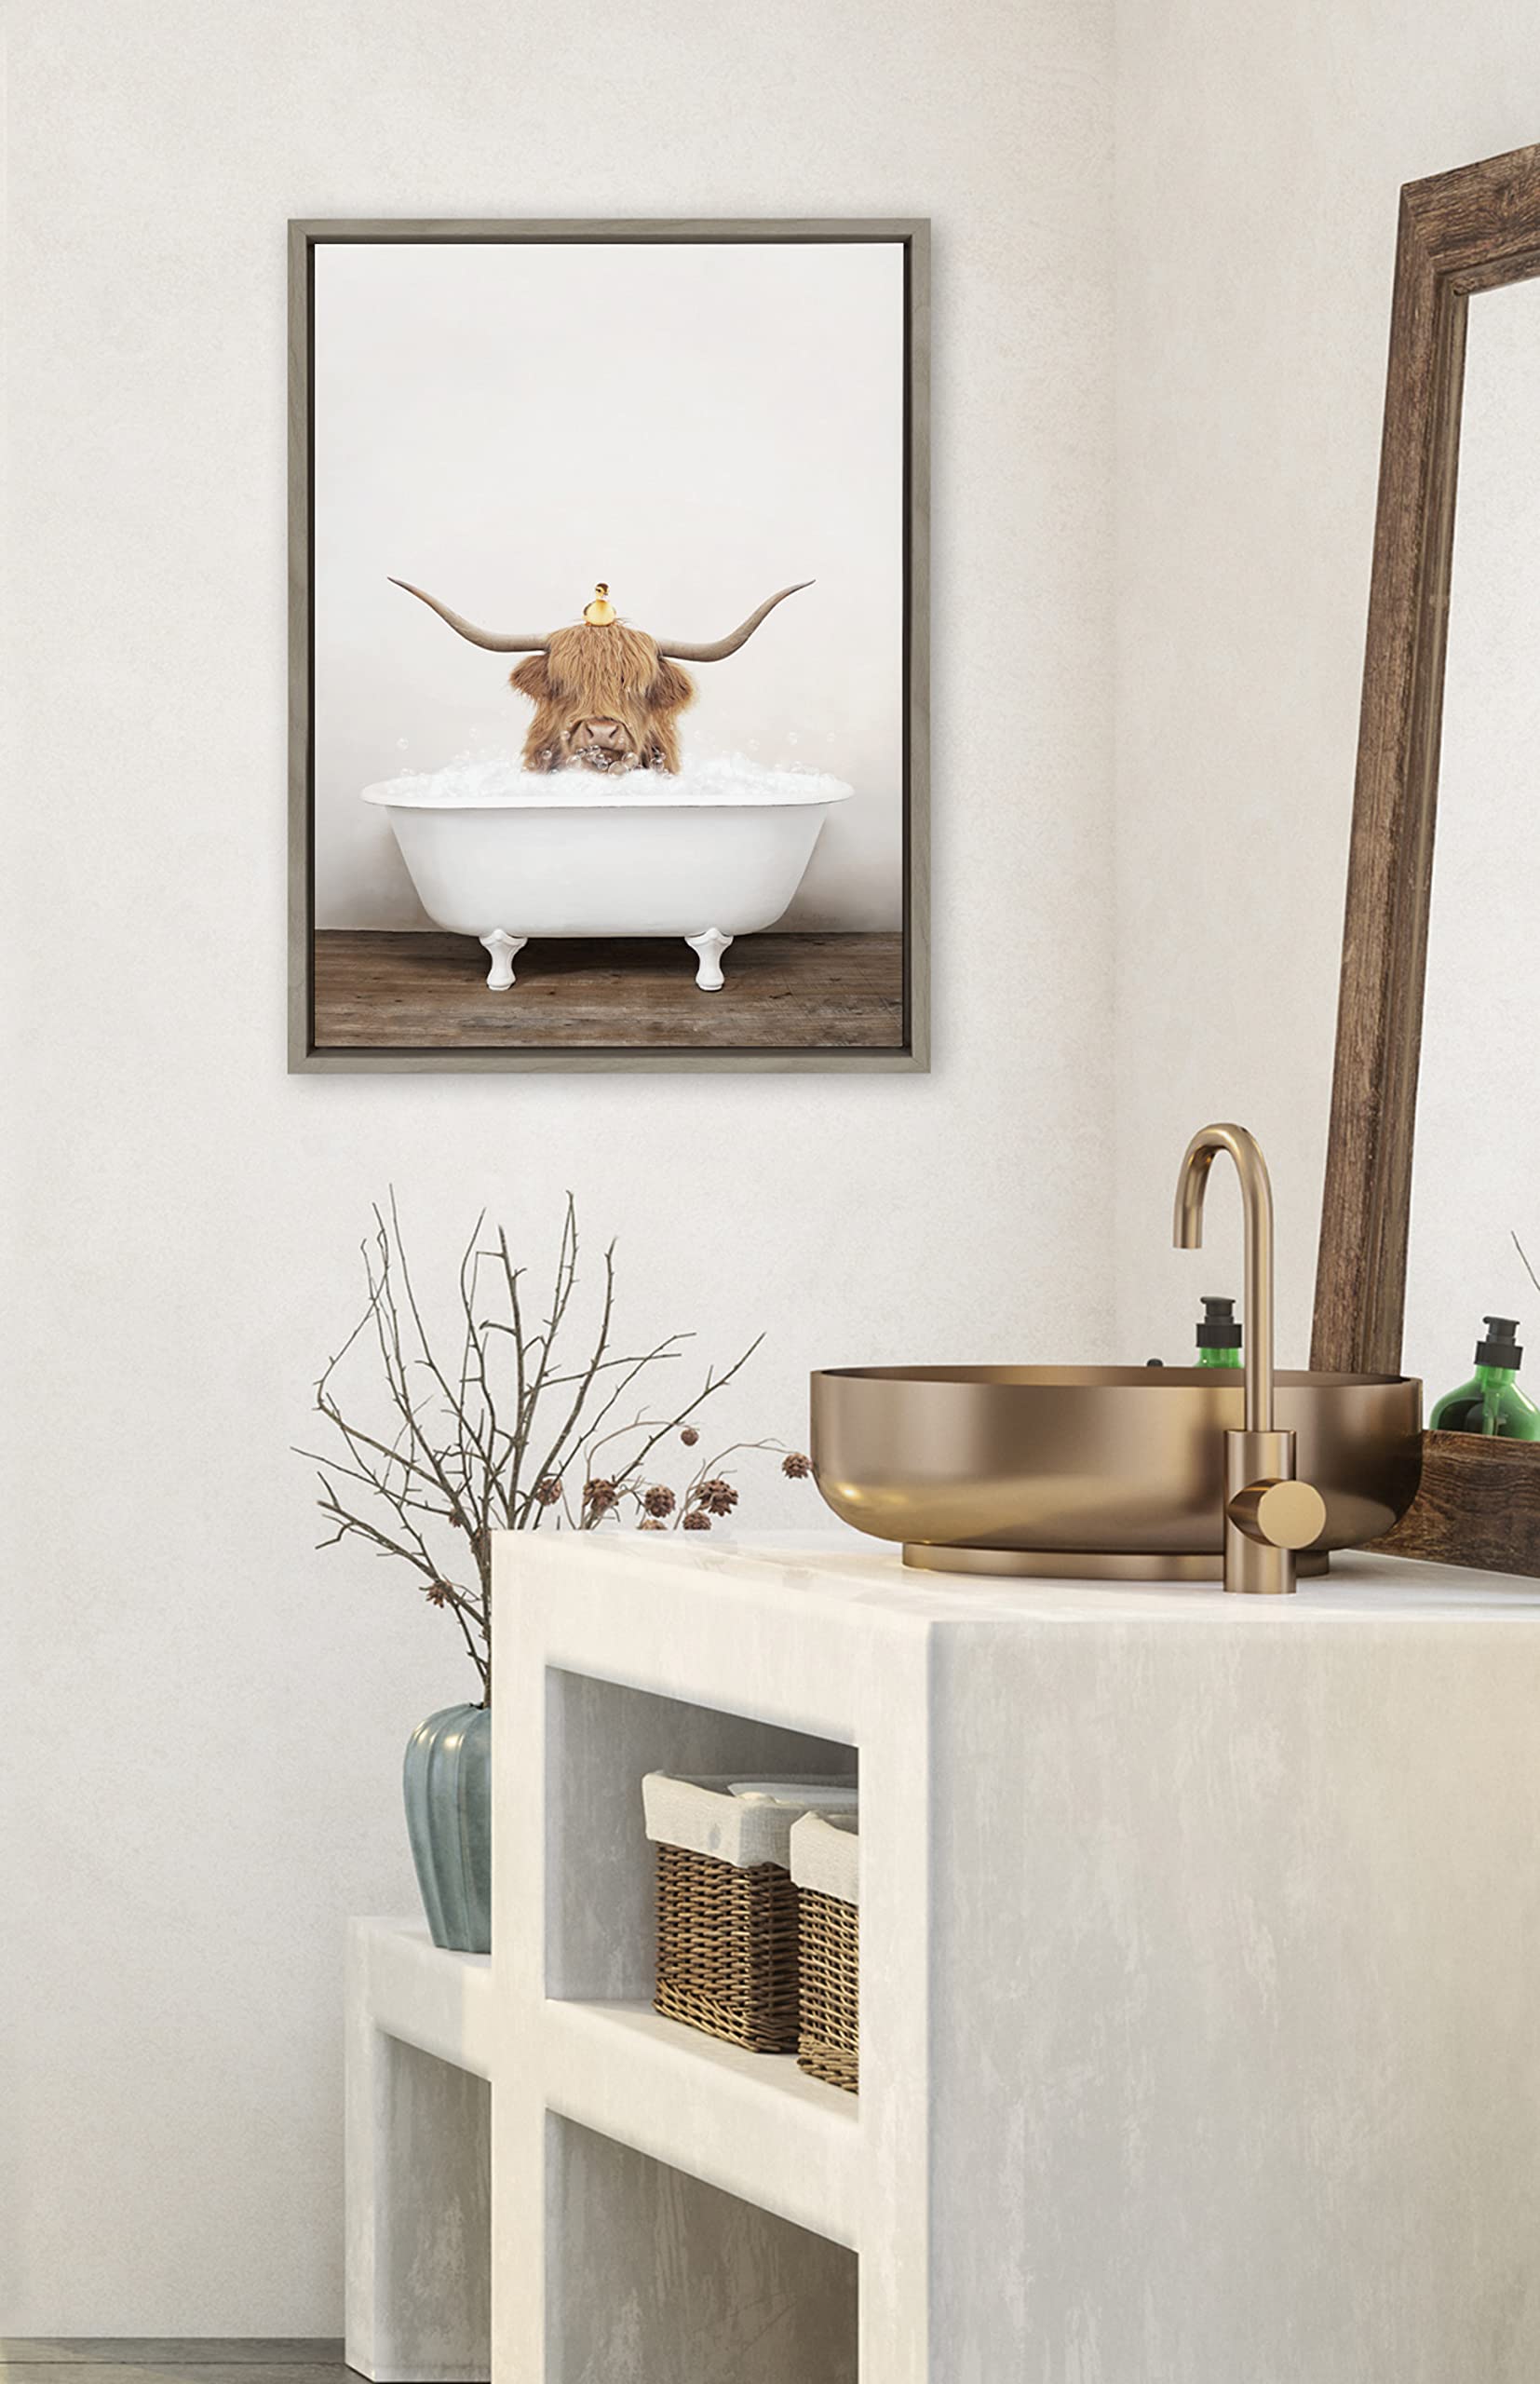 Kate and Laurel Sylvie Highland Cow and Duckling in Rustic Bath Framed Canvas Wall Art by Amy Peterson Art Studio, 18x24 Gray, Modern Fun Decorative Bathtub Wall Art for Home Décor